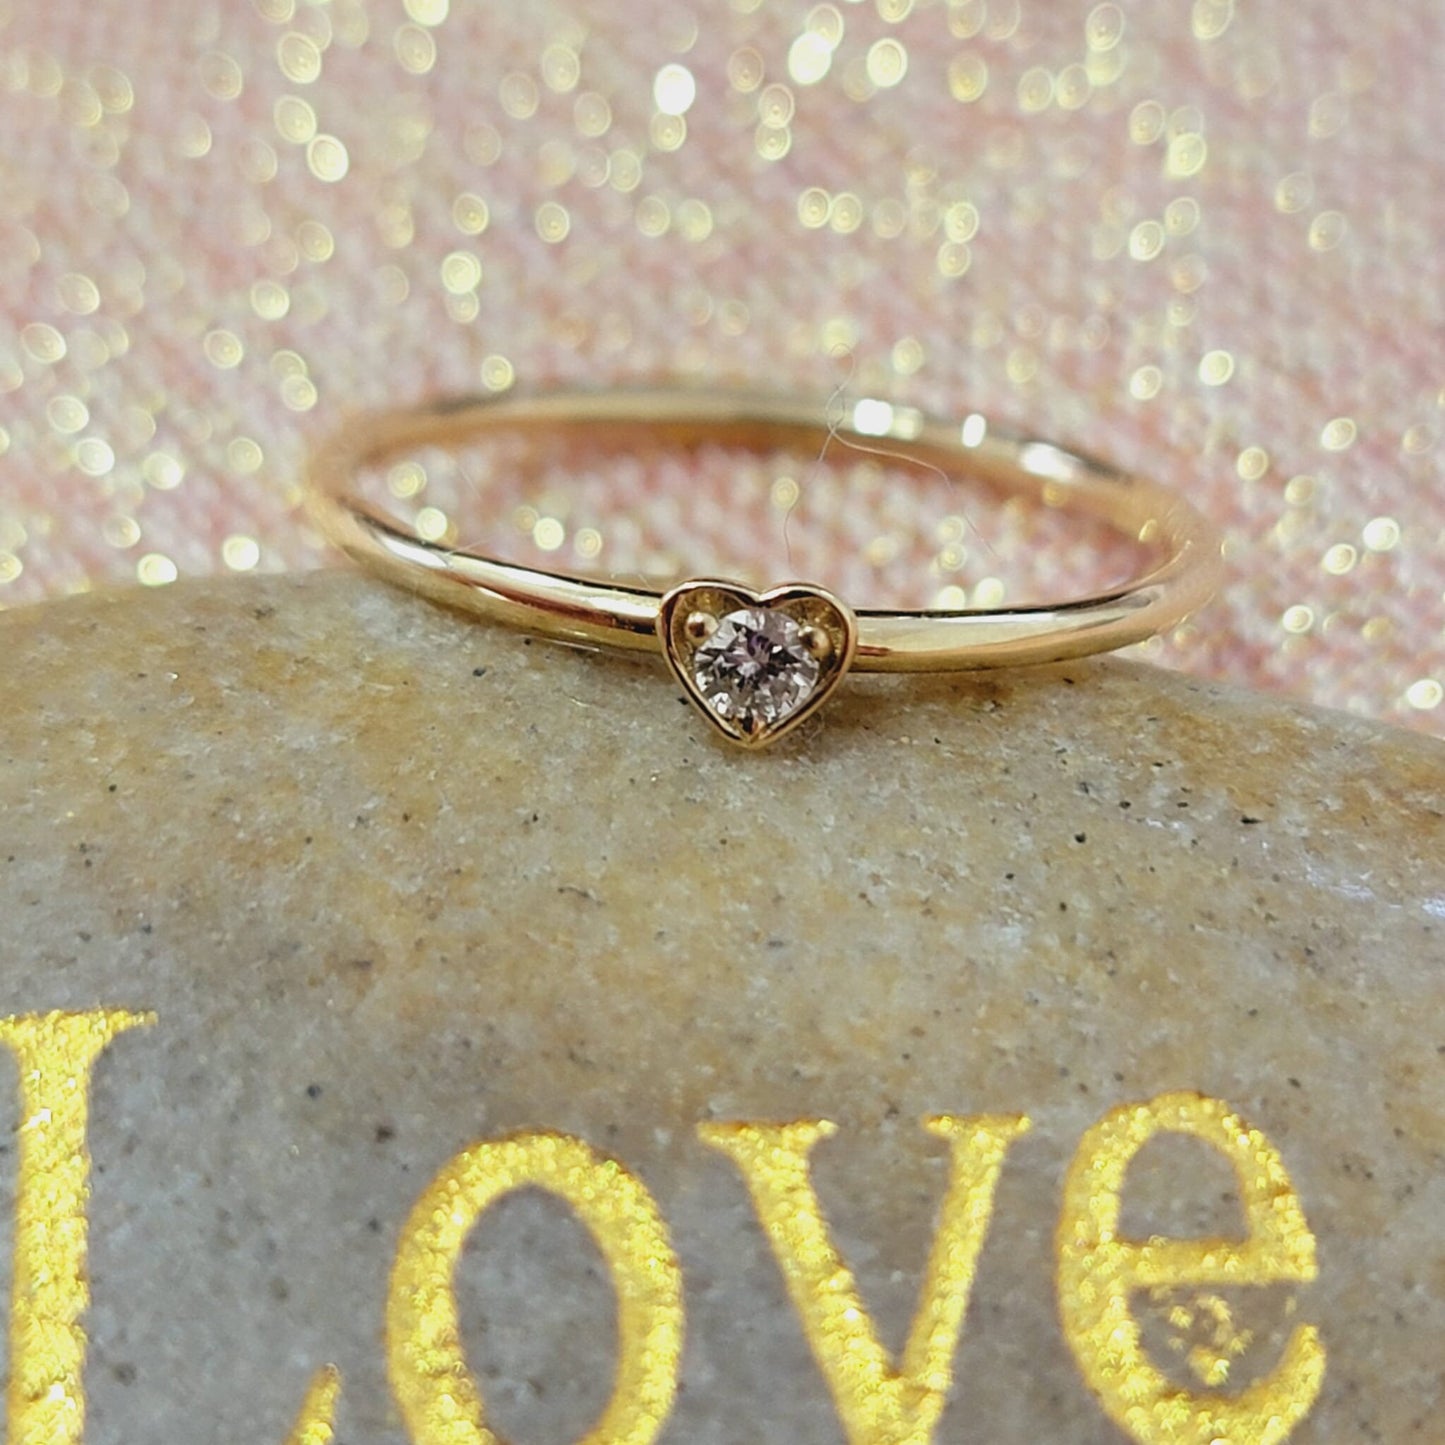 Heart-Shape Diamond Ring, Tiny Diamond Ring Women, Solid Gold Band, Promise Ring,  14k Gold Stackable Ring, White Gold Ring, Minimalist ring